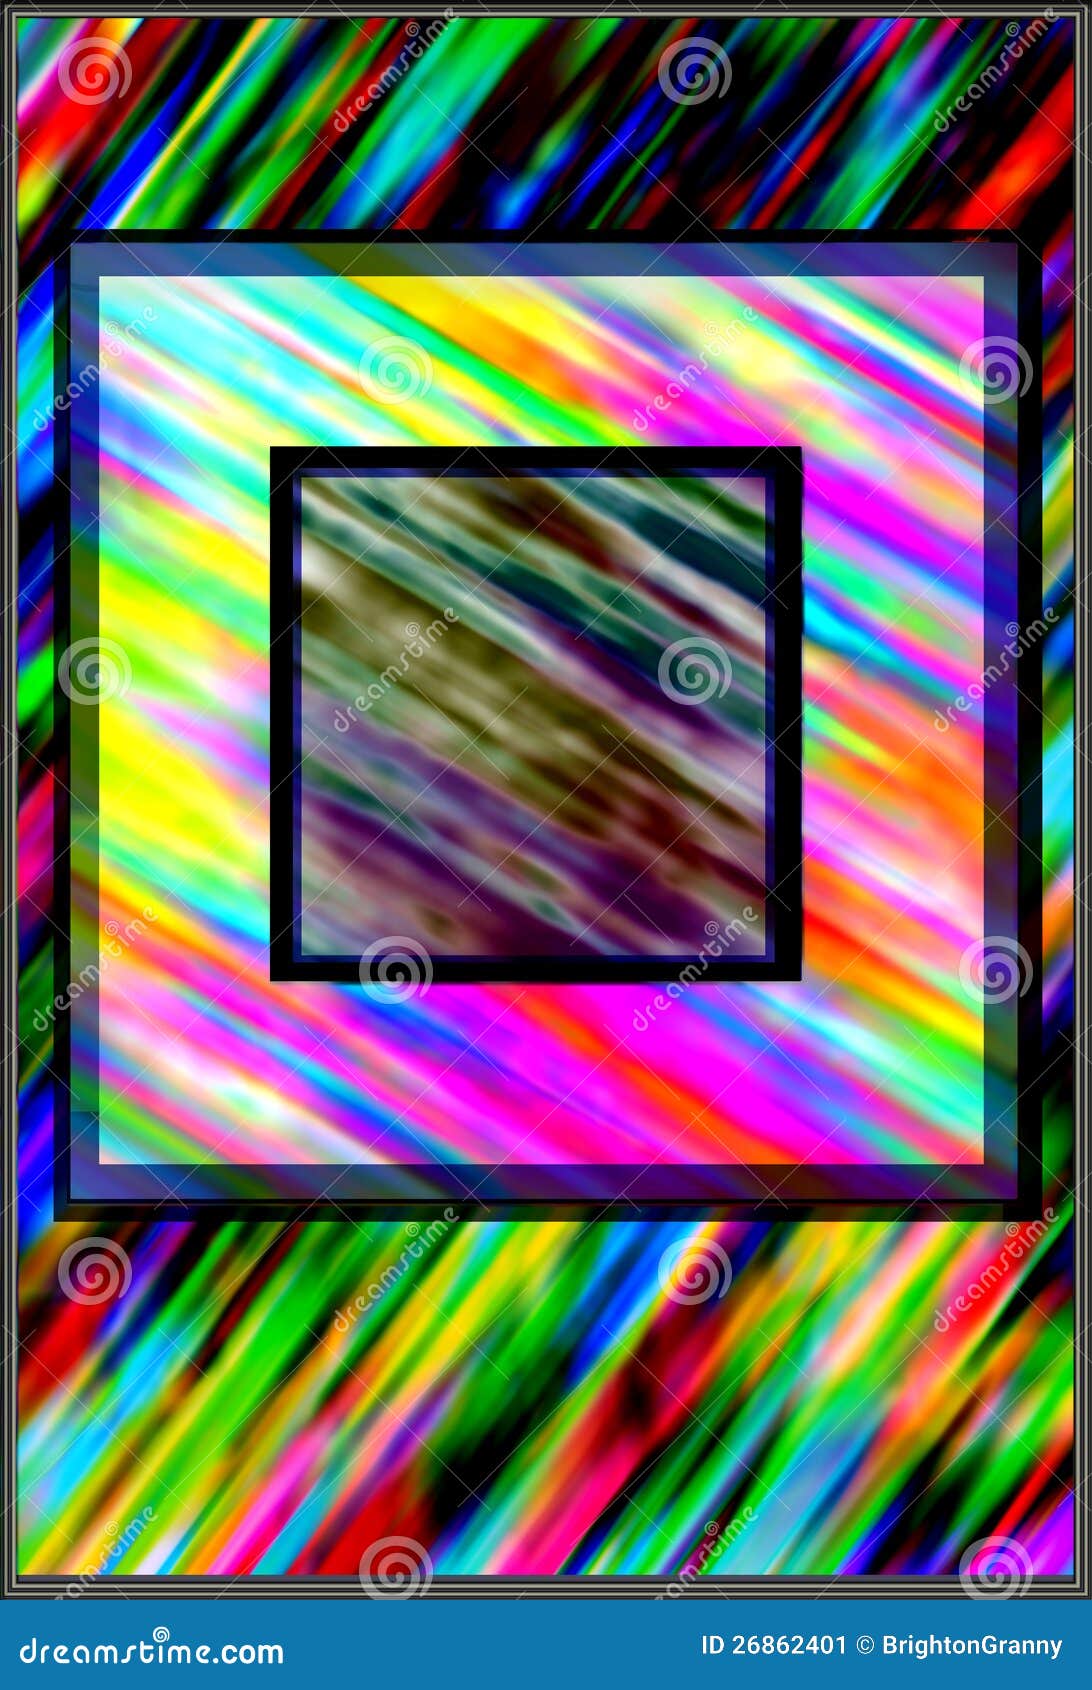 colorful background with square frames superposed